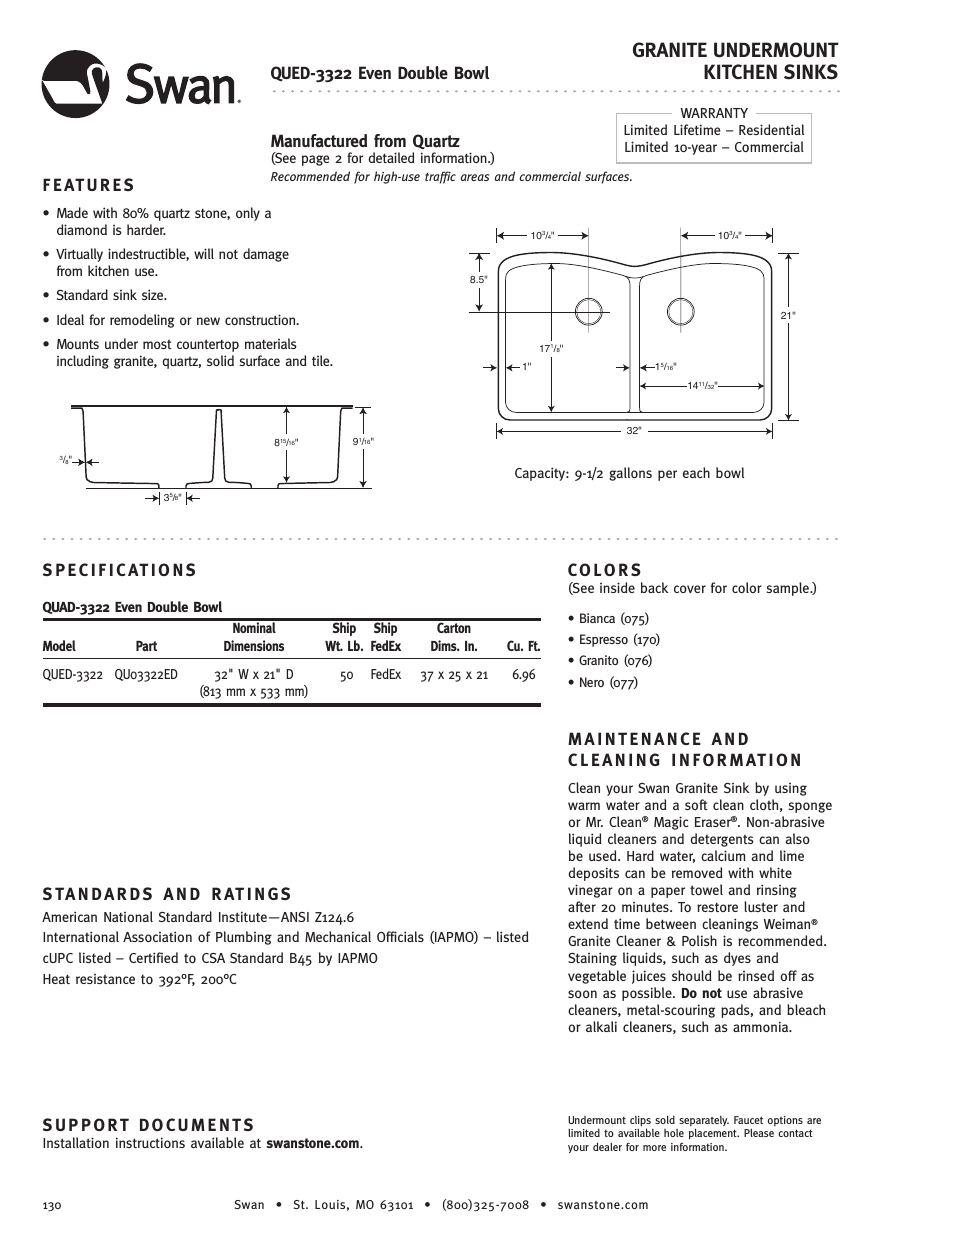 QUED-3322 - Specification